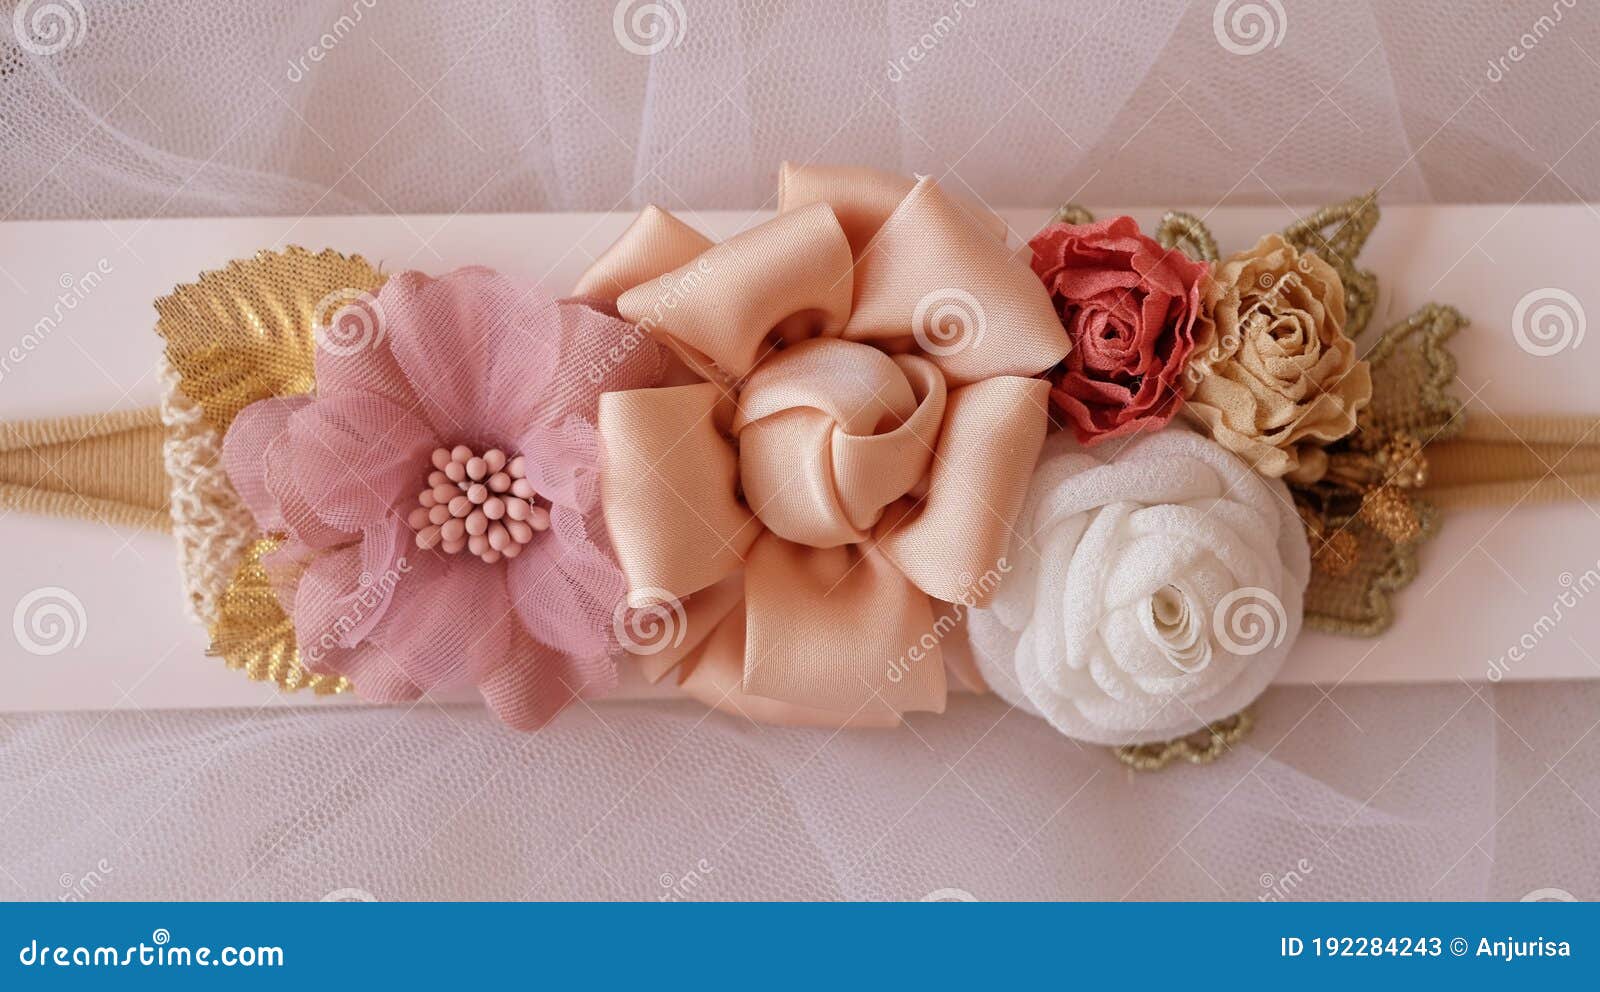 Handmade Headband Hair Accessory with Unique and Beautiful Design Made Out  of Fabric in Beautiful Colors Stock Image - Image of accessory, crafting:  192284243